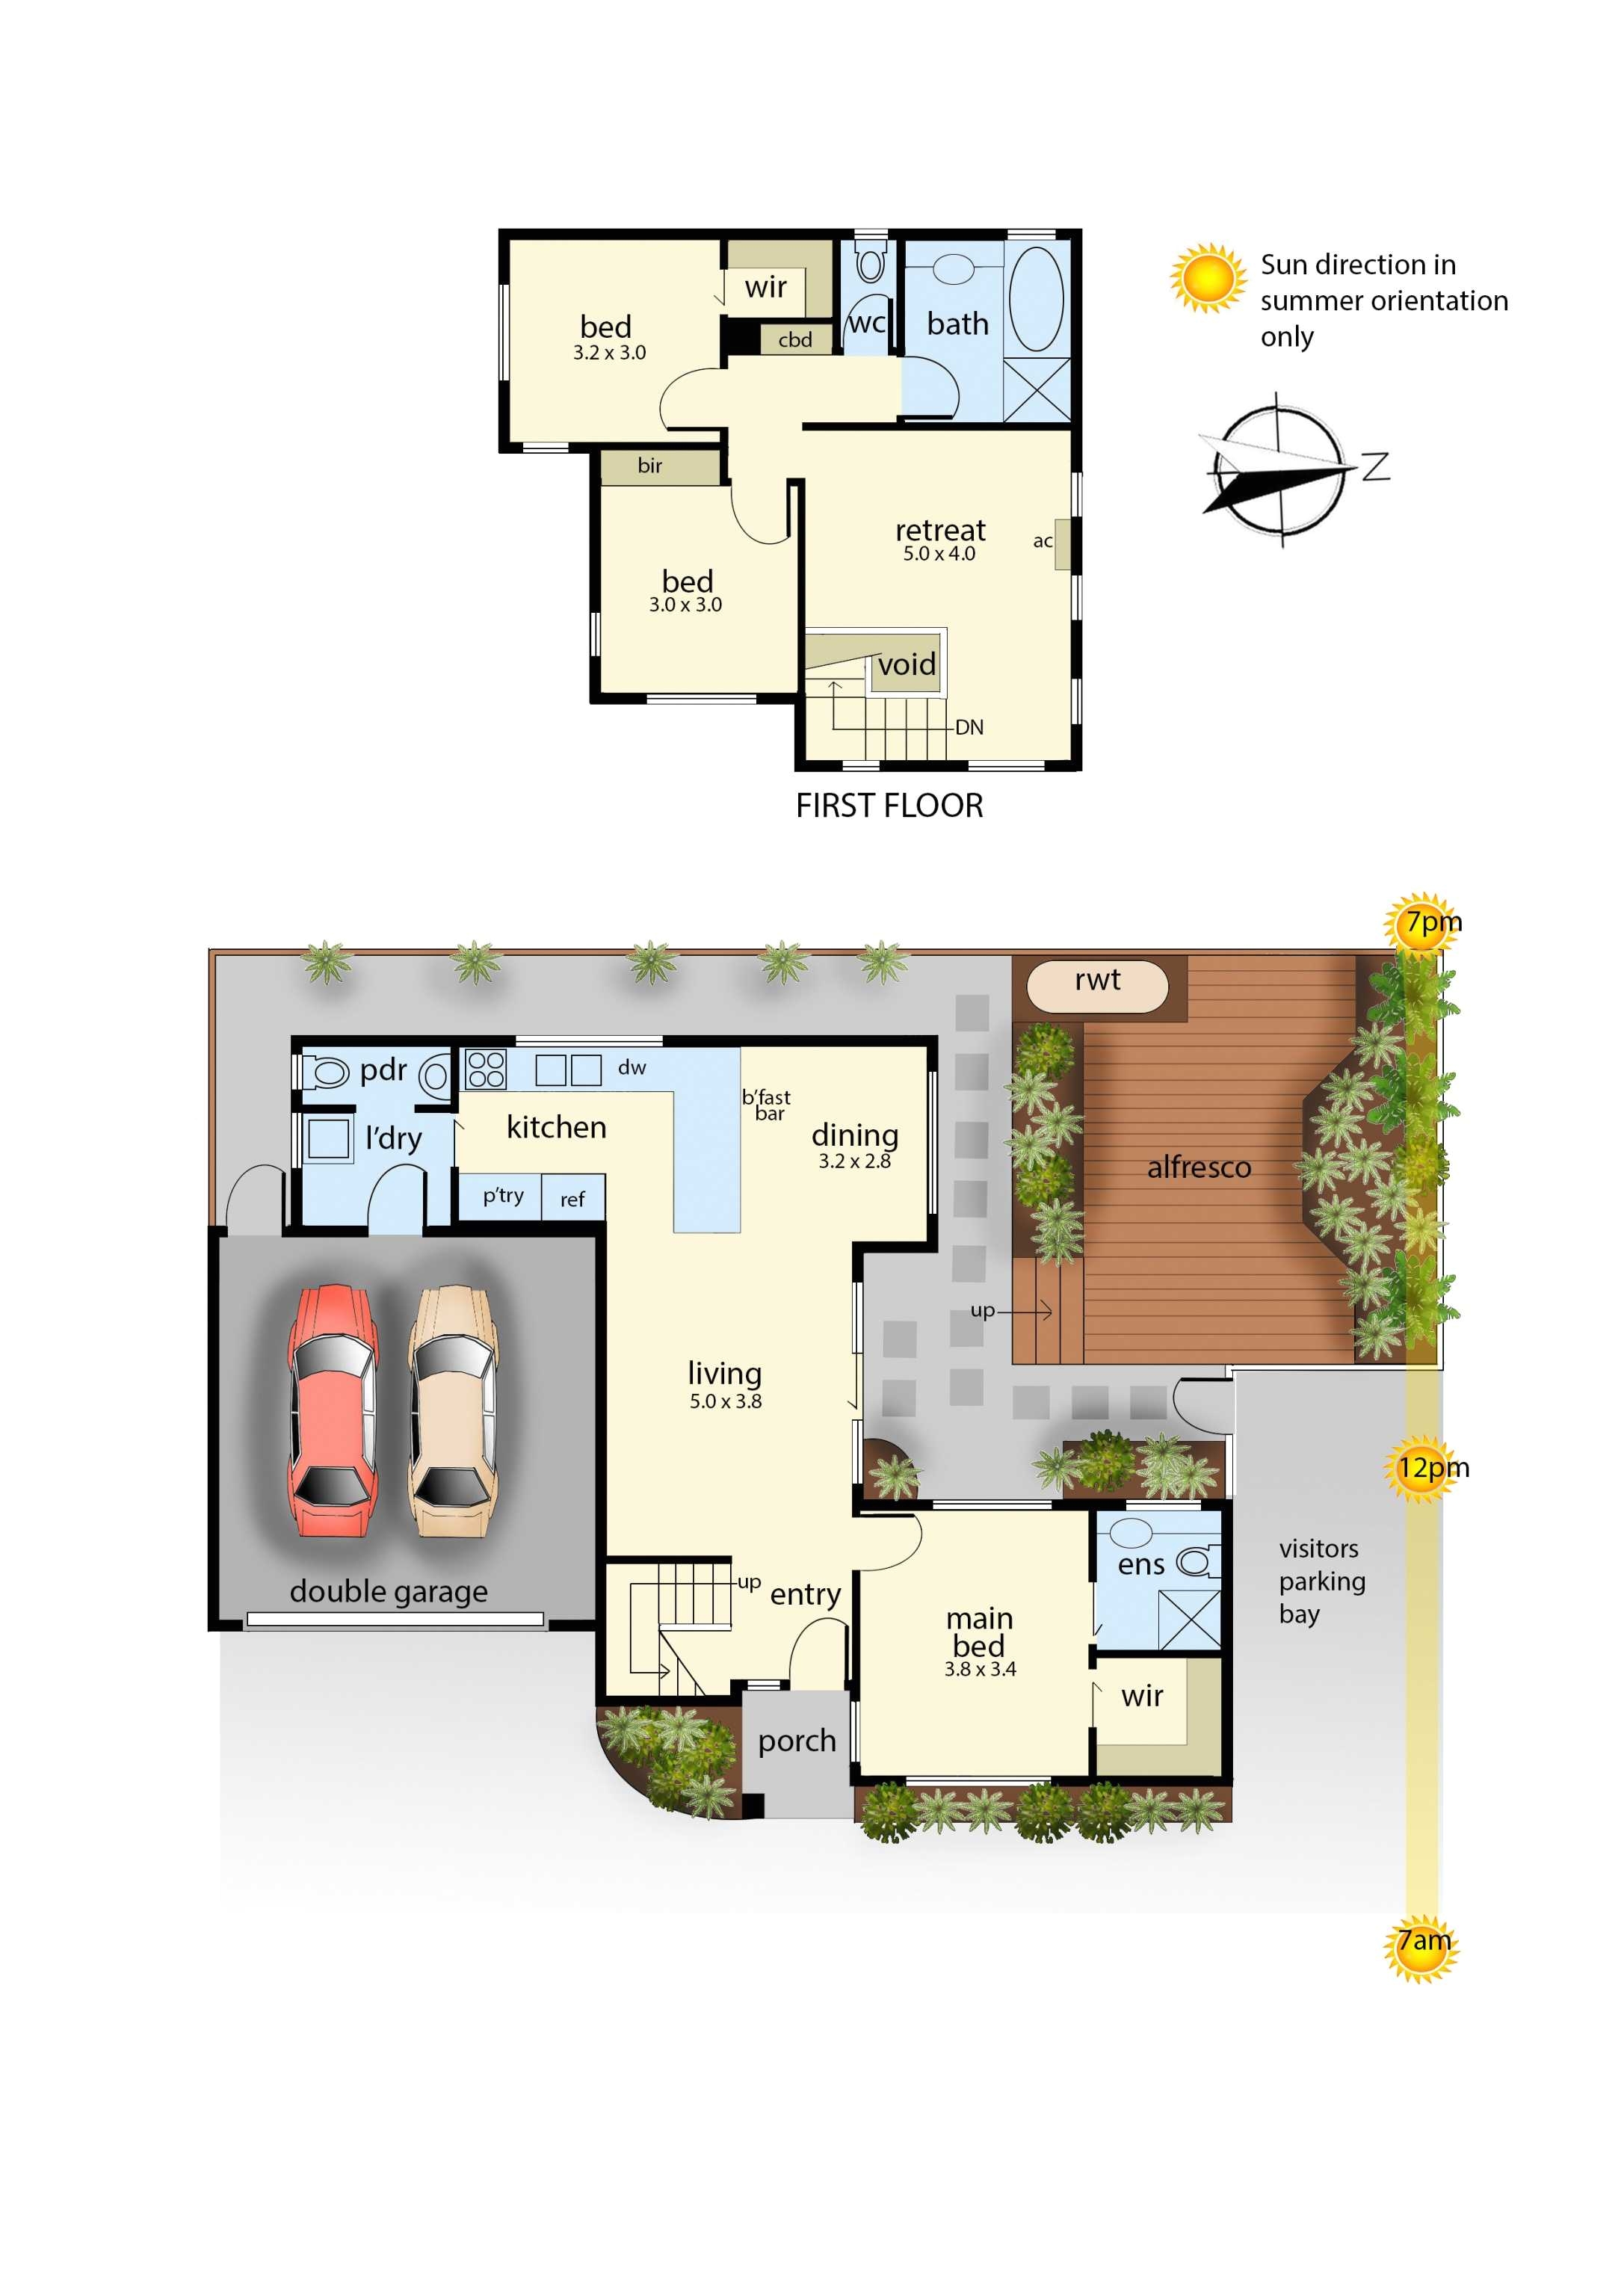 house plans under 150k and properties page 2 ash marton realty